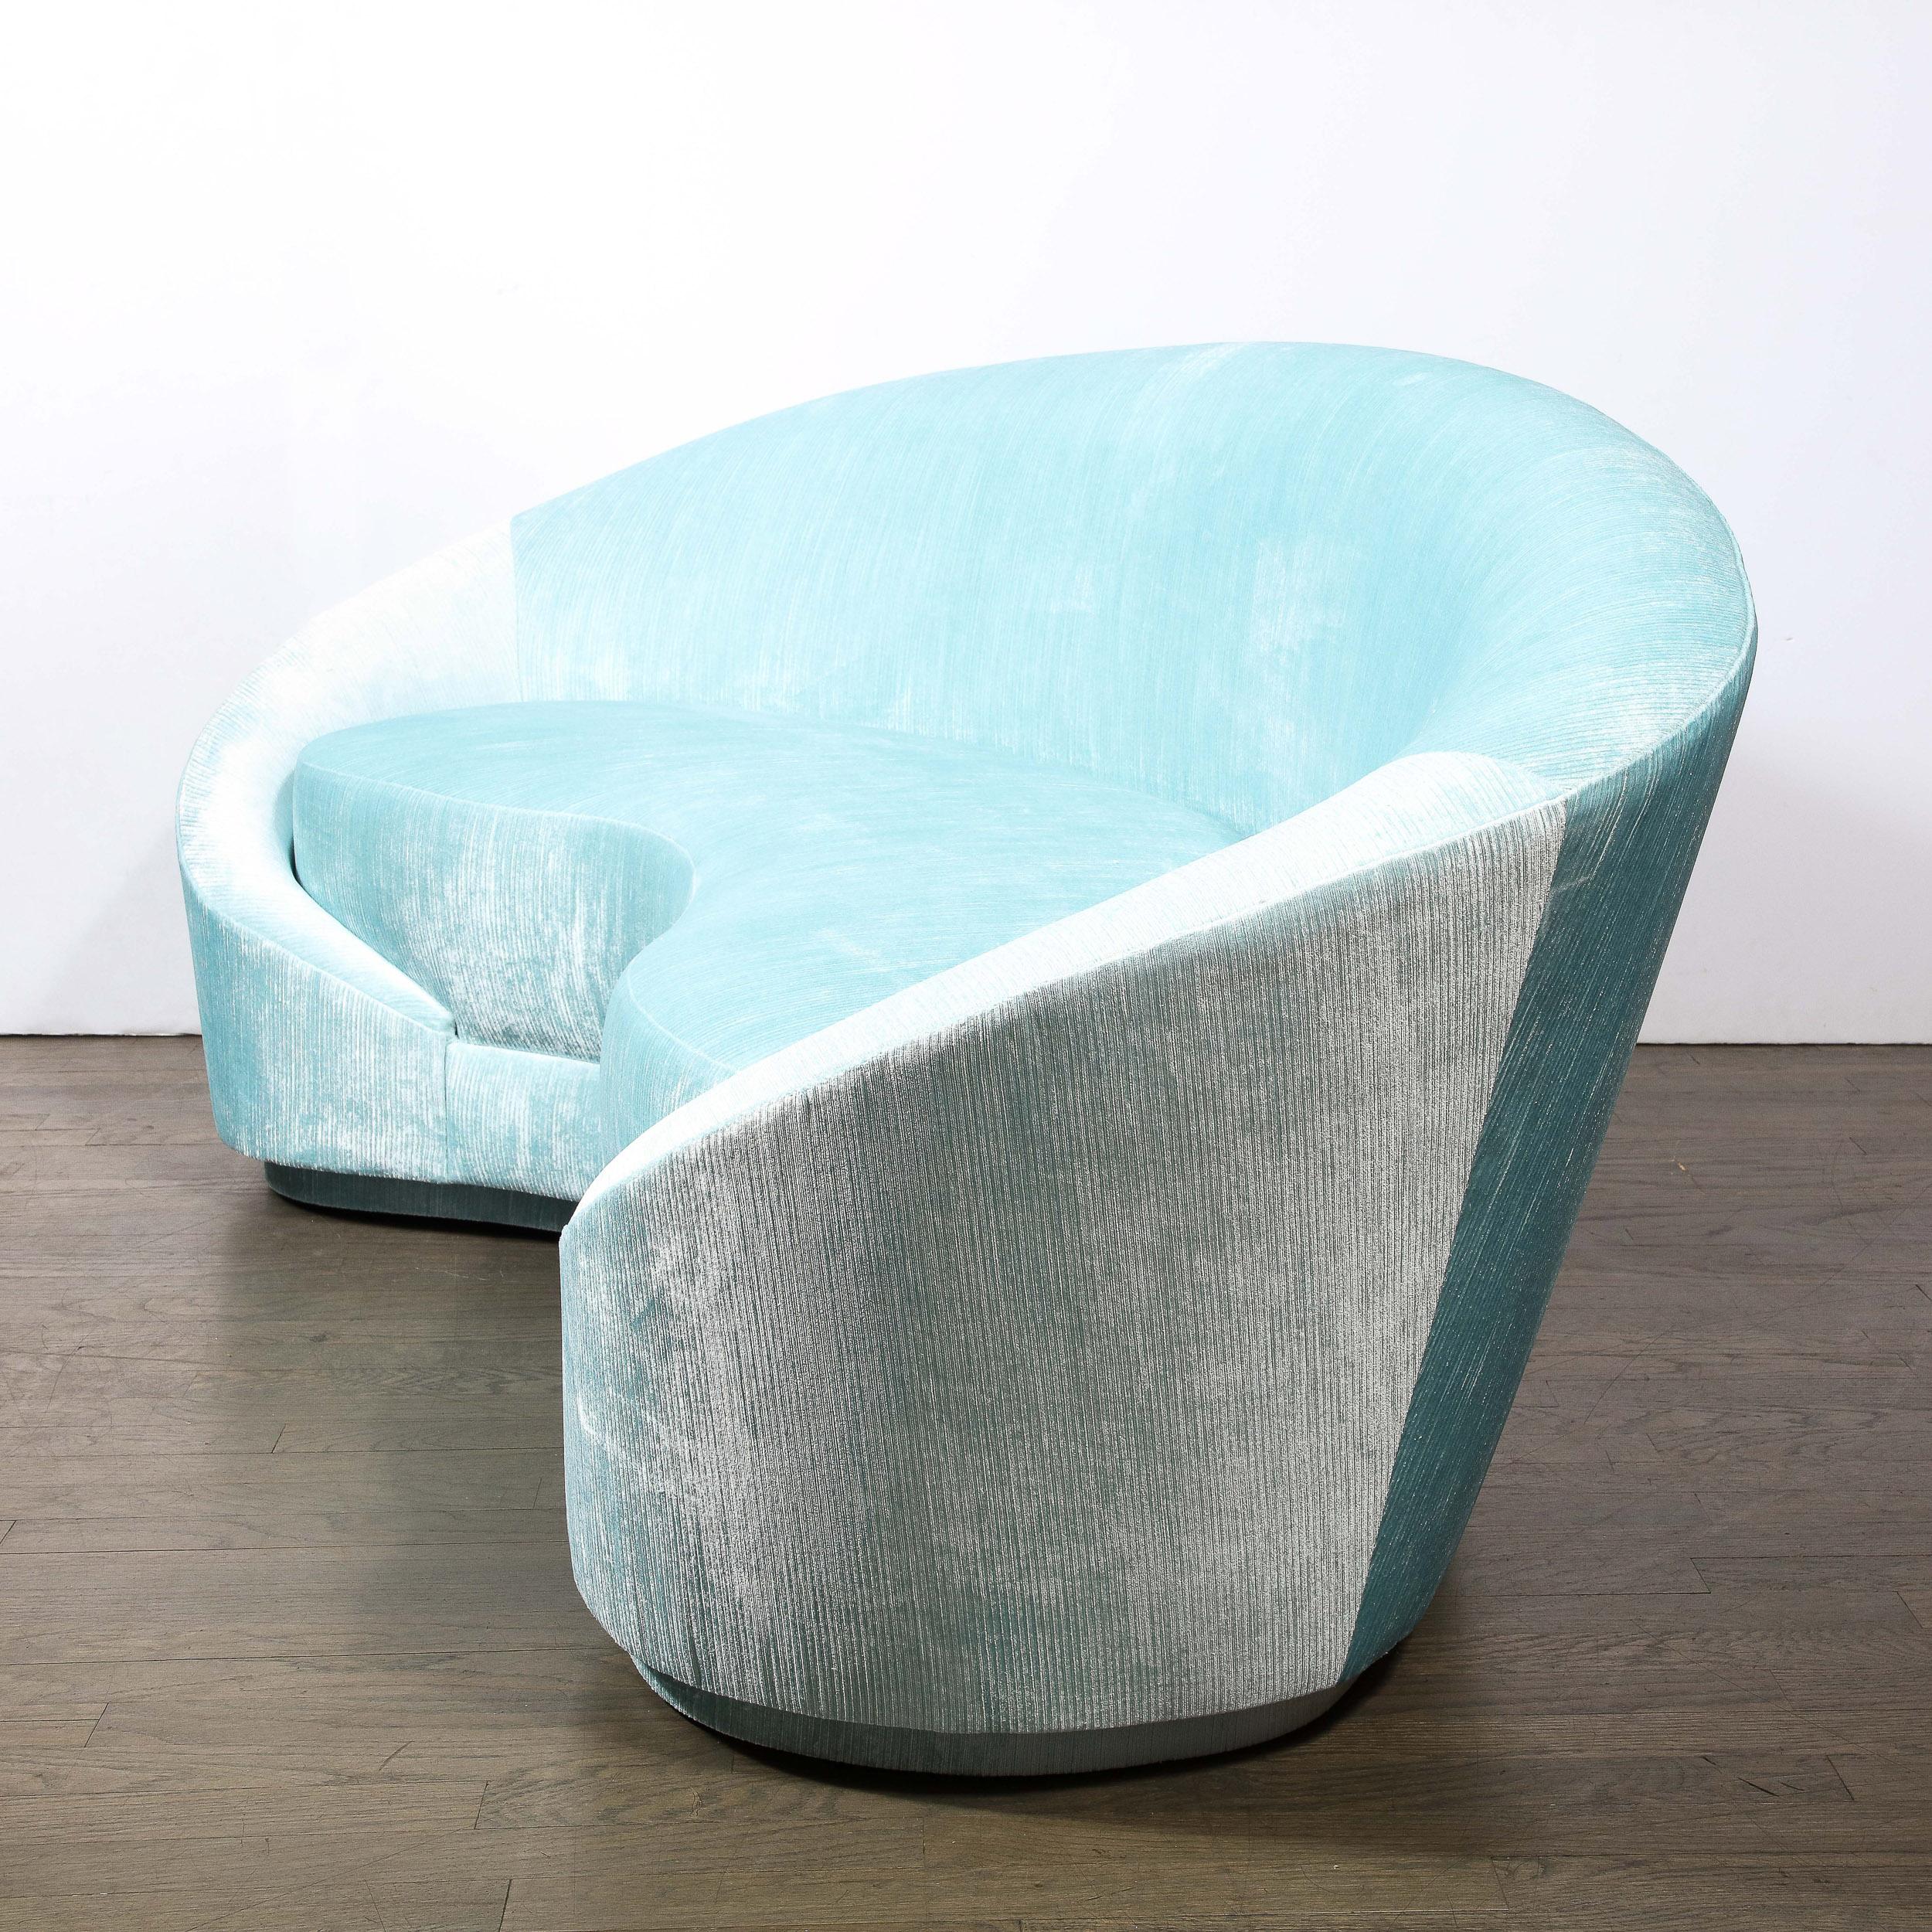 Contemporary 1940s Style Modernist Custom Sweeping Curved Sofa in Aquamarine Velvet For Sale